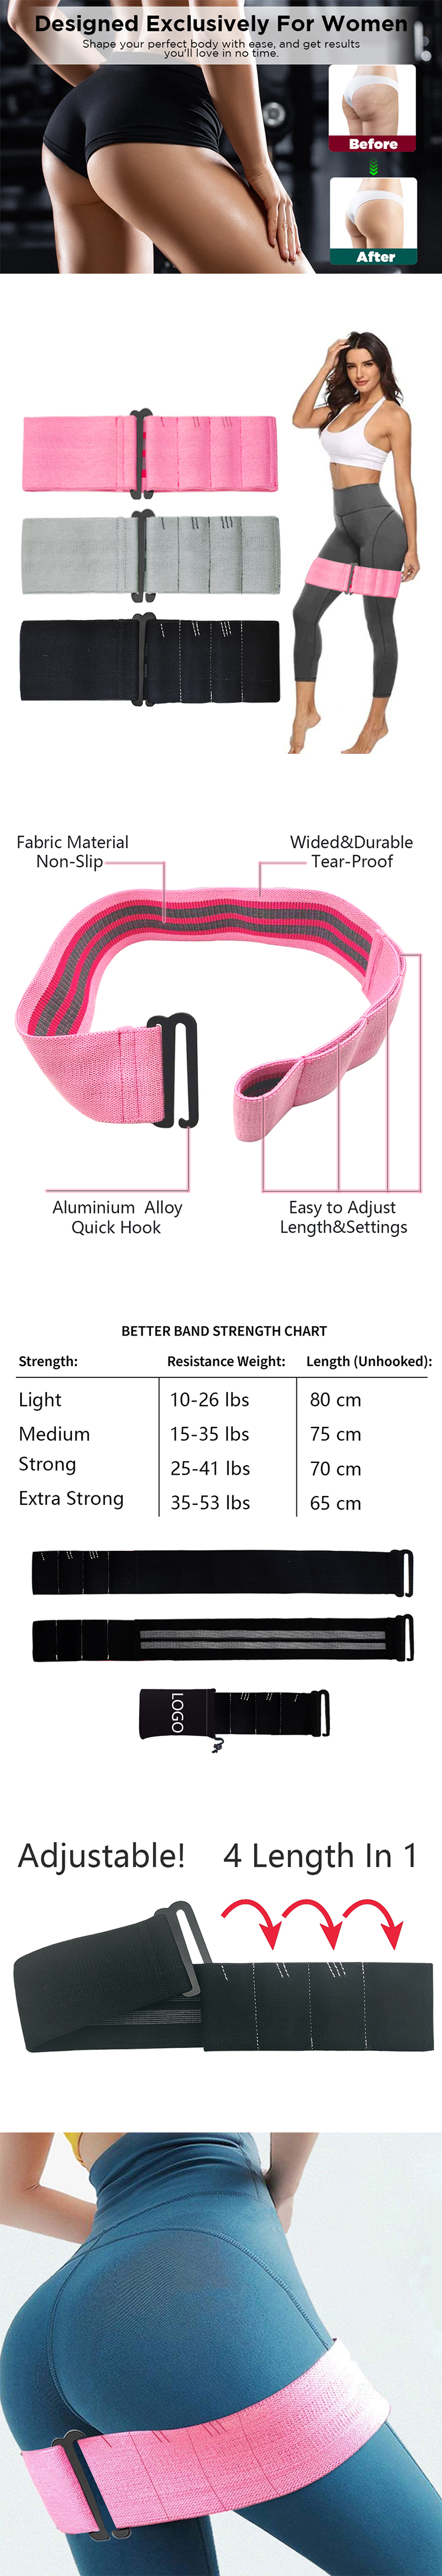 Divtop Adjustable 4 Length In 1 Hook Bands Fabric Resistance Bands, Wide Non-Slip Glute Workout Squat Hip Booty Exercise Bands;